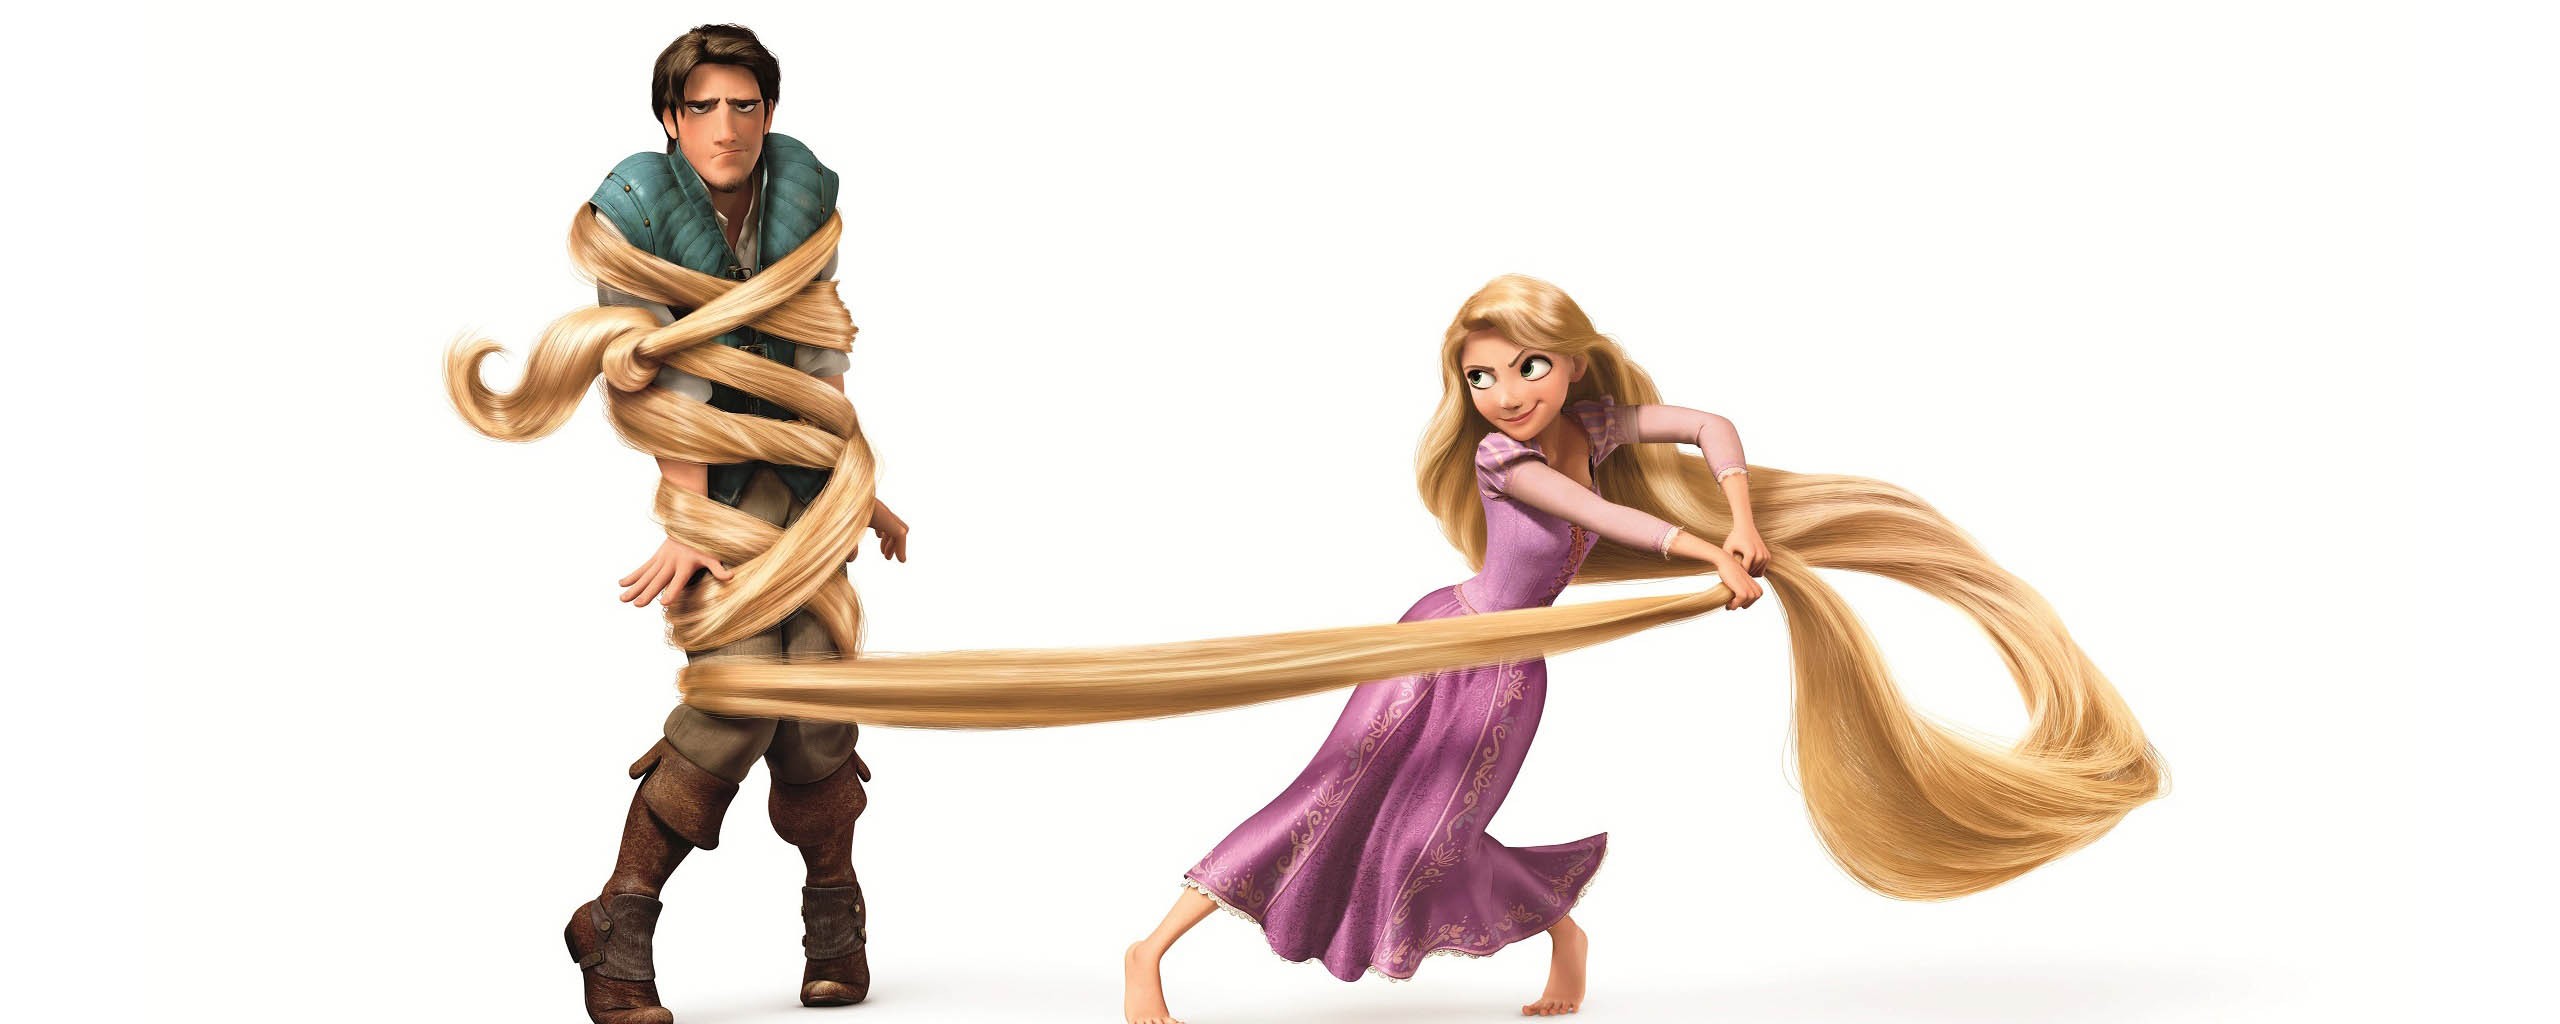 Tangled Rapunzel And Flynn   Clipart Panda   Free Clipart Images